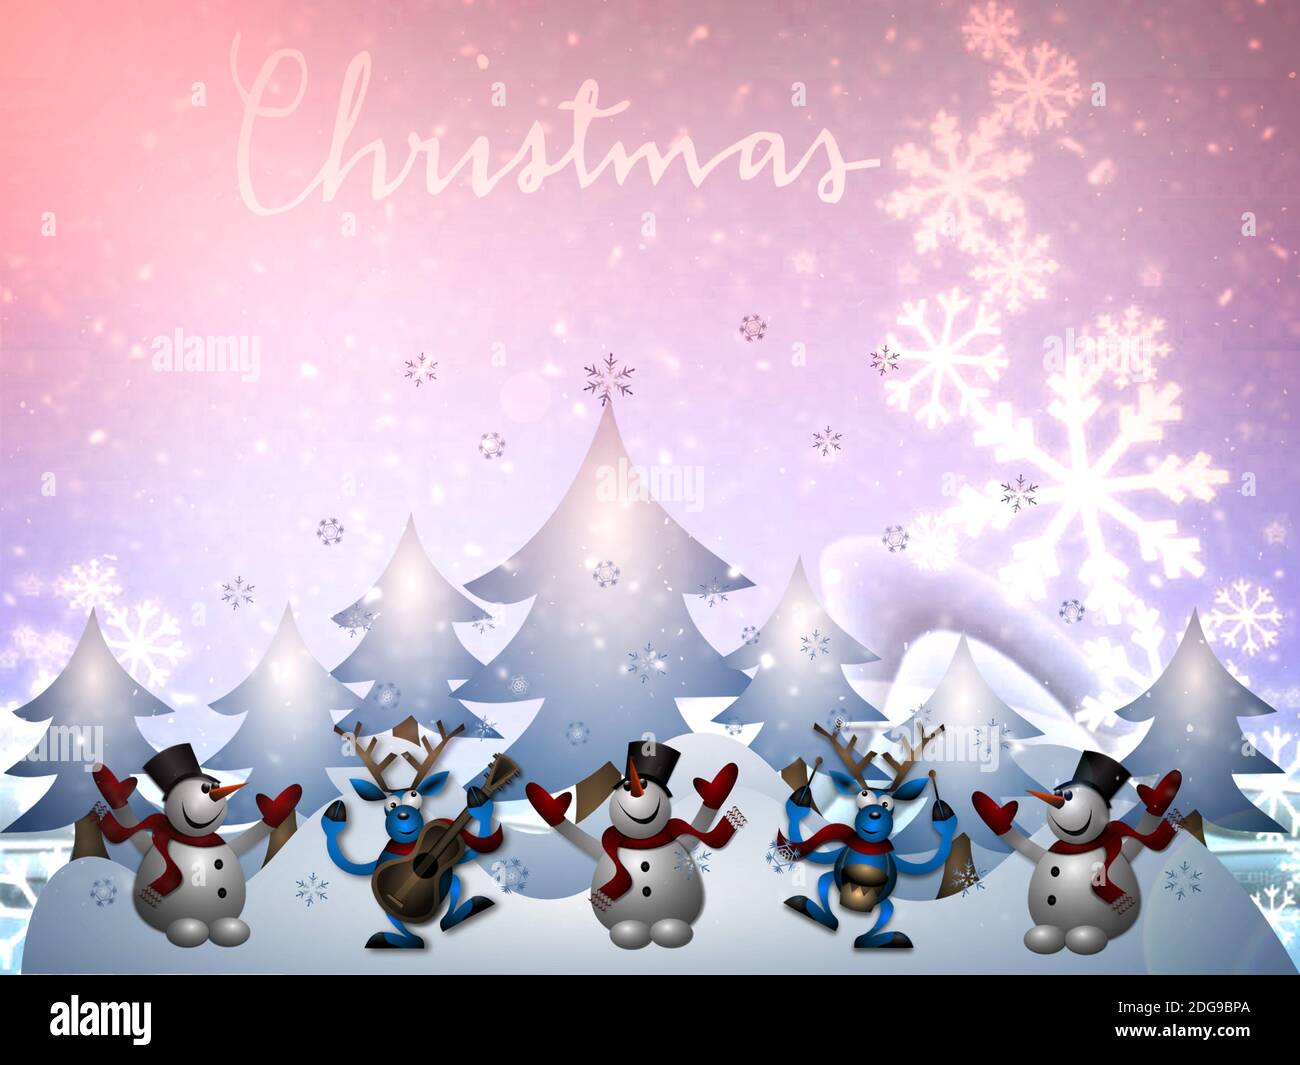 Christmas greeting card with the image of a snowman. Stock Photo